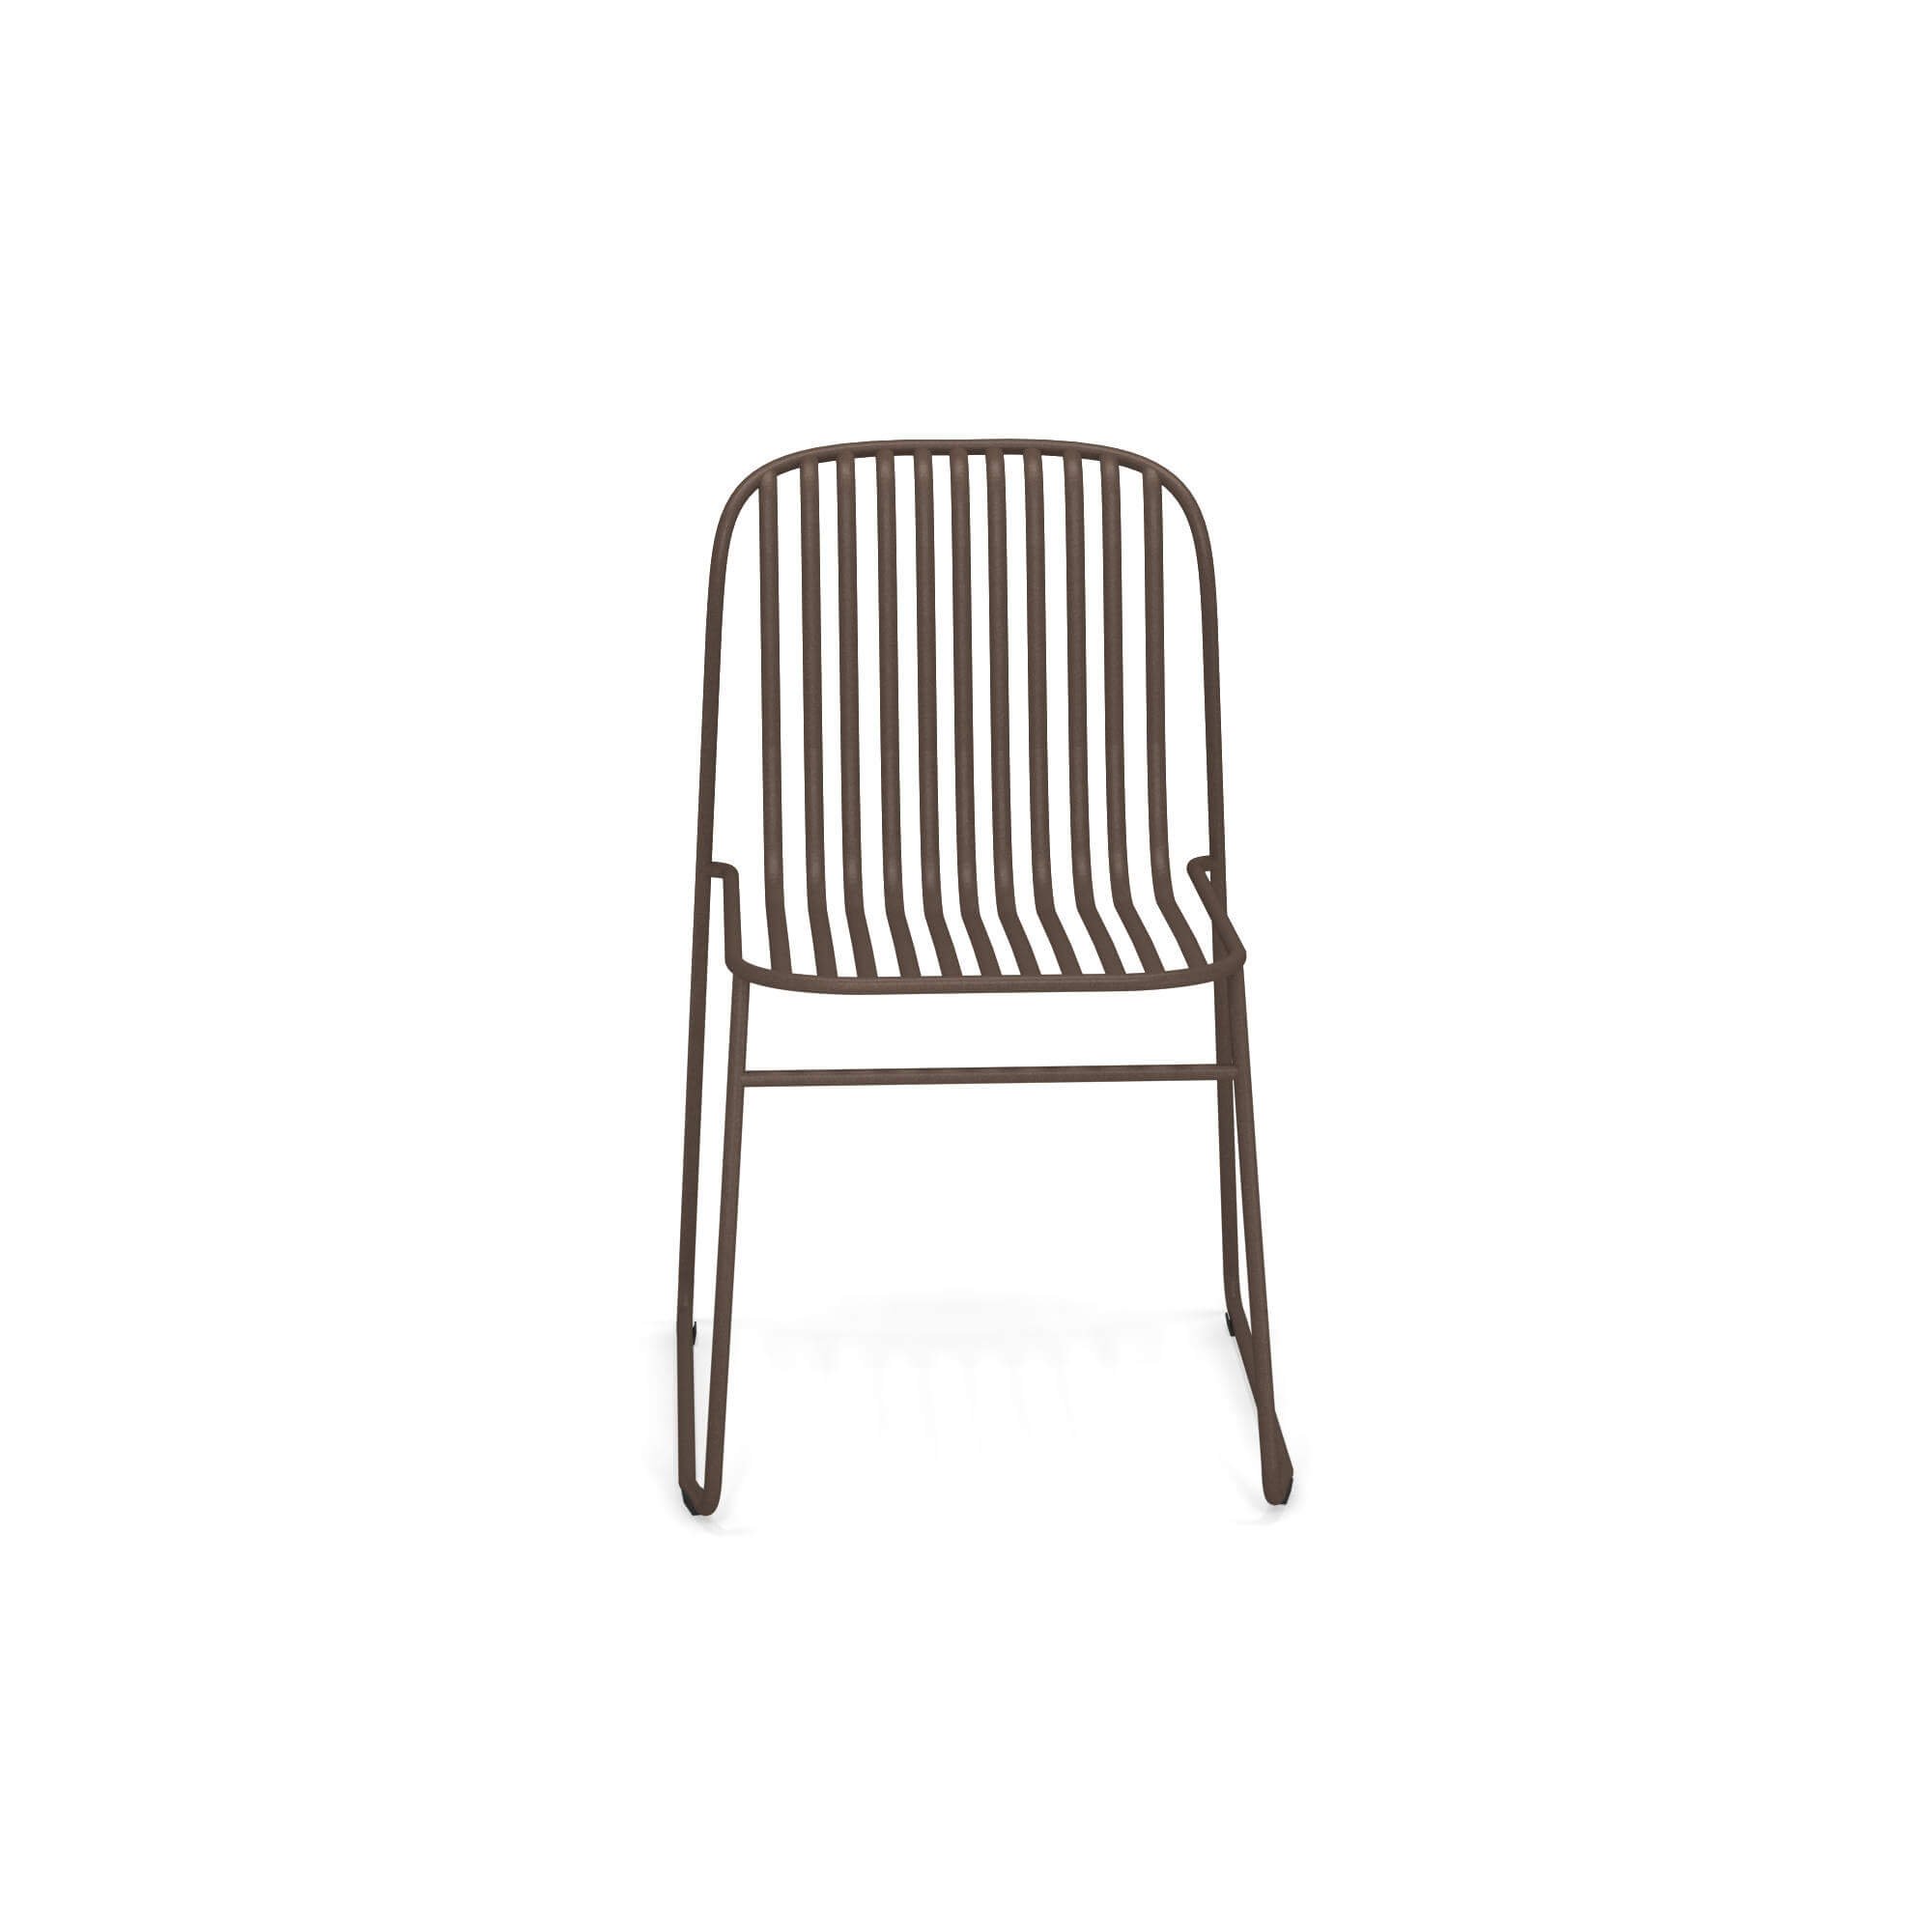 Riviera 434 Chair from Emu, designed by Lucidi and Pevere